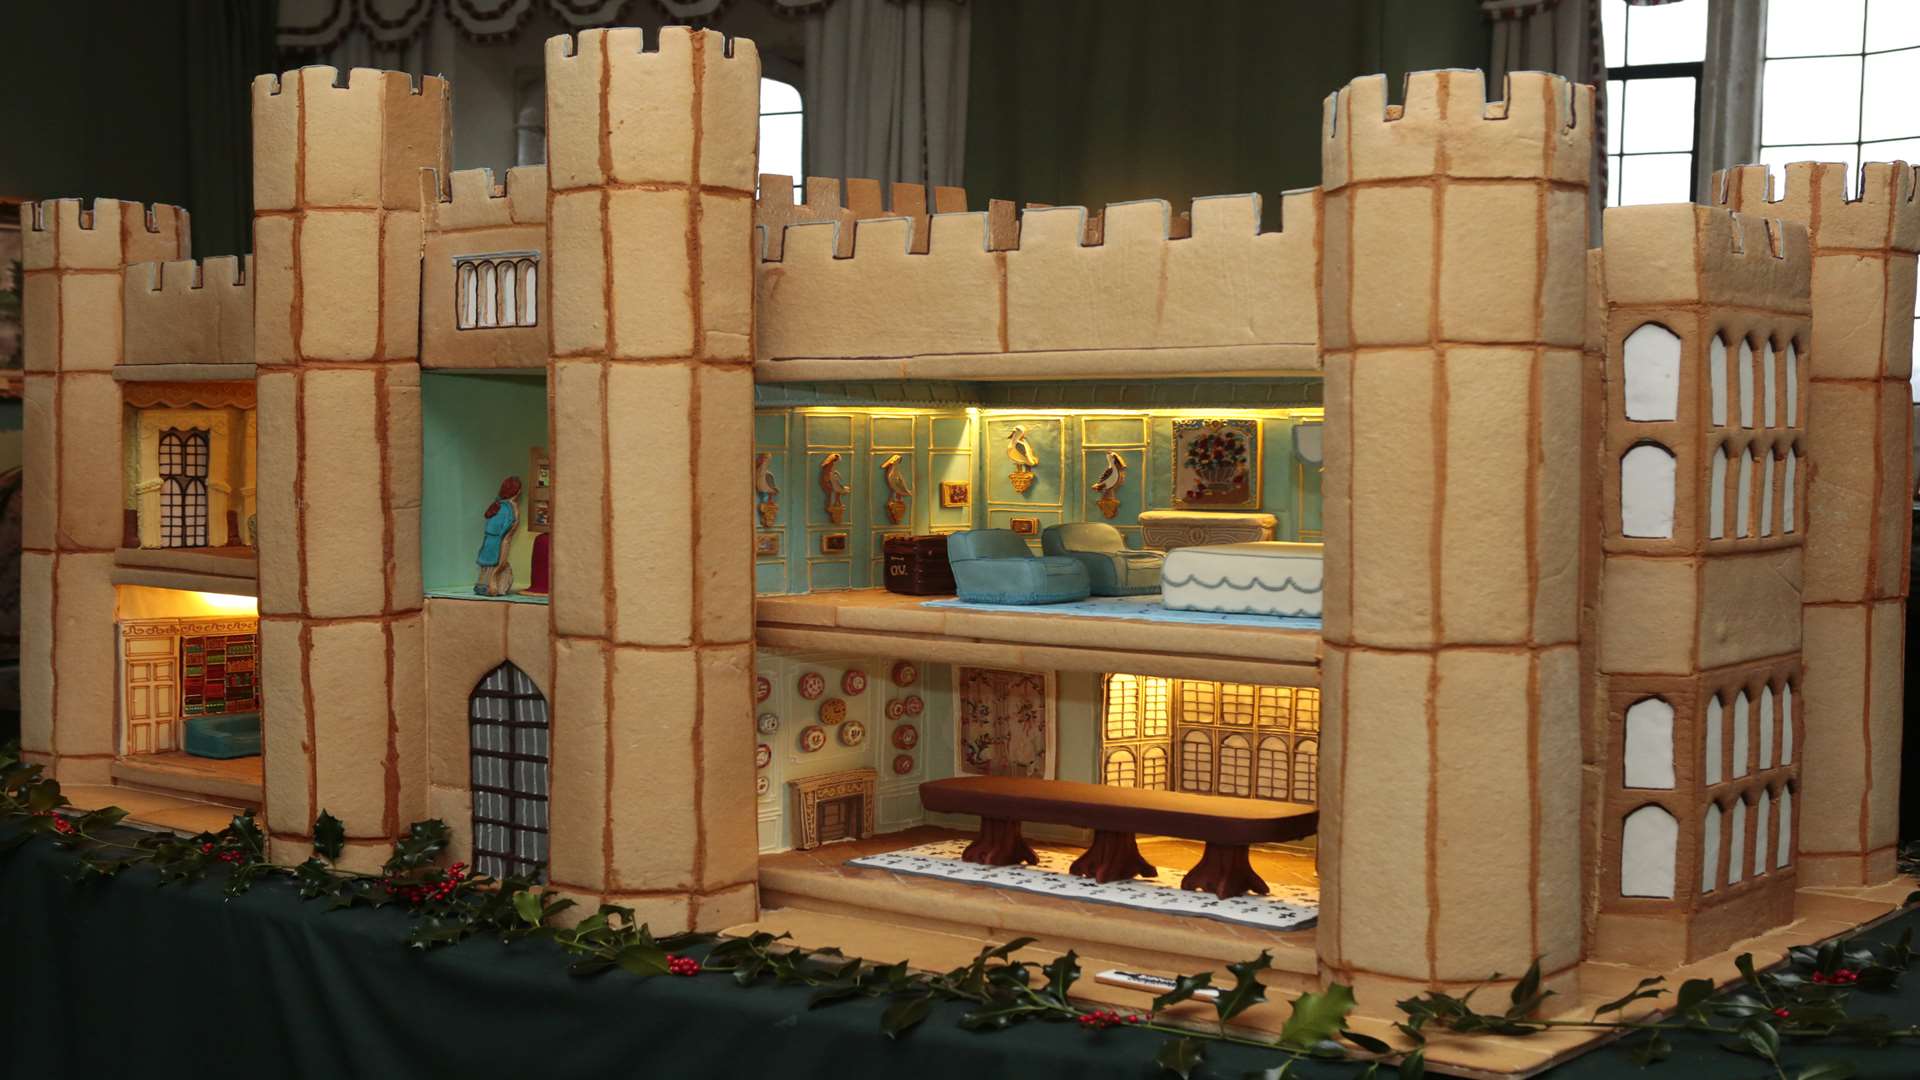 The gingerbread castle and doll's house